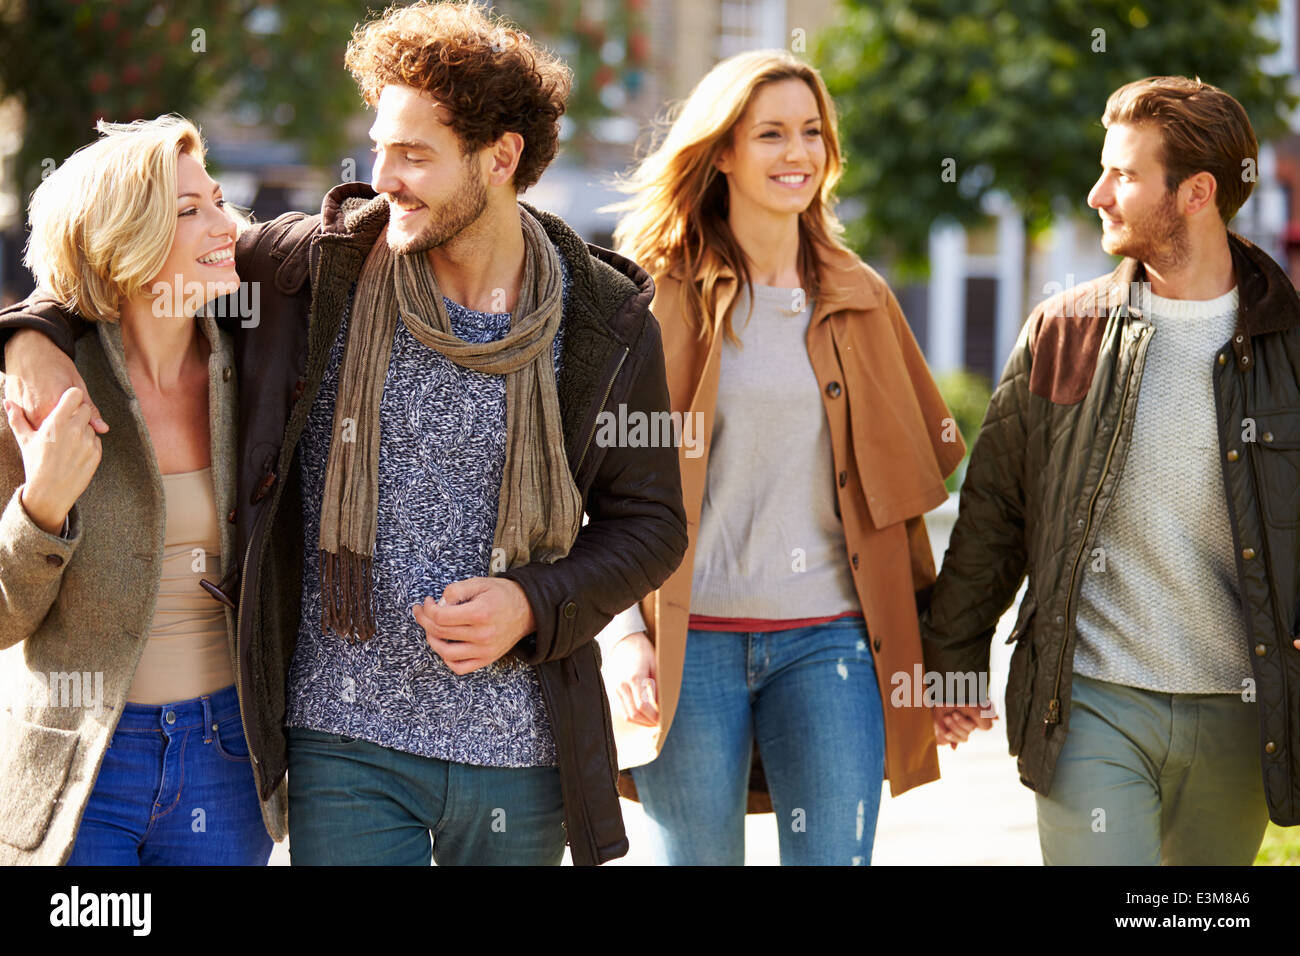 Group Of Friends Walking Through City Park Together Stock Photo